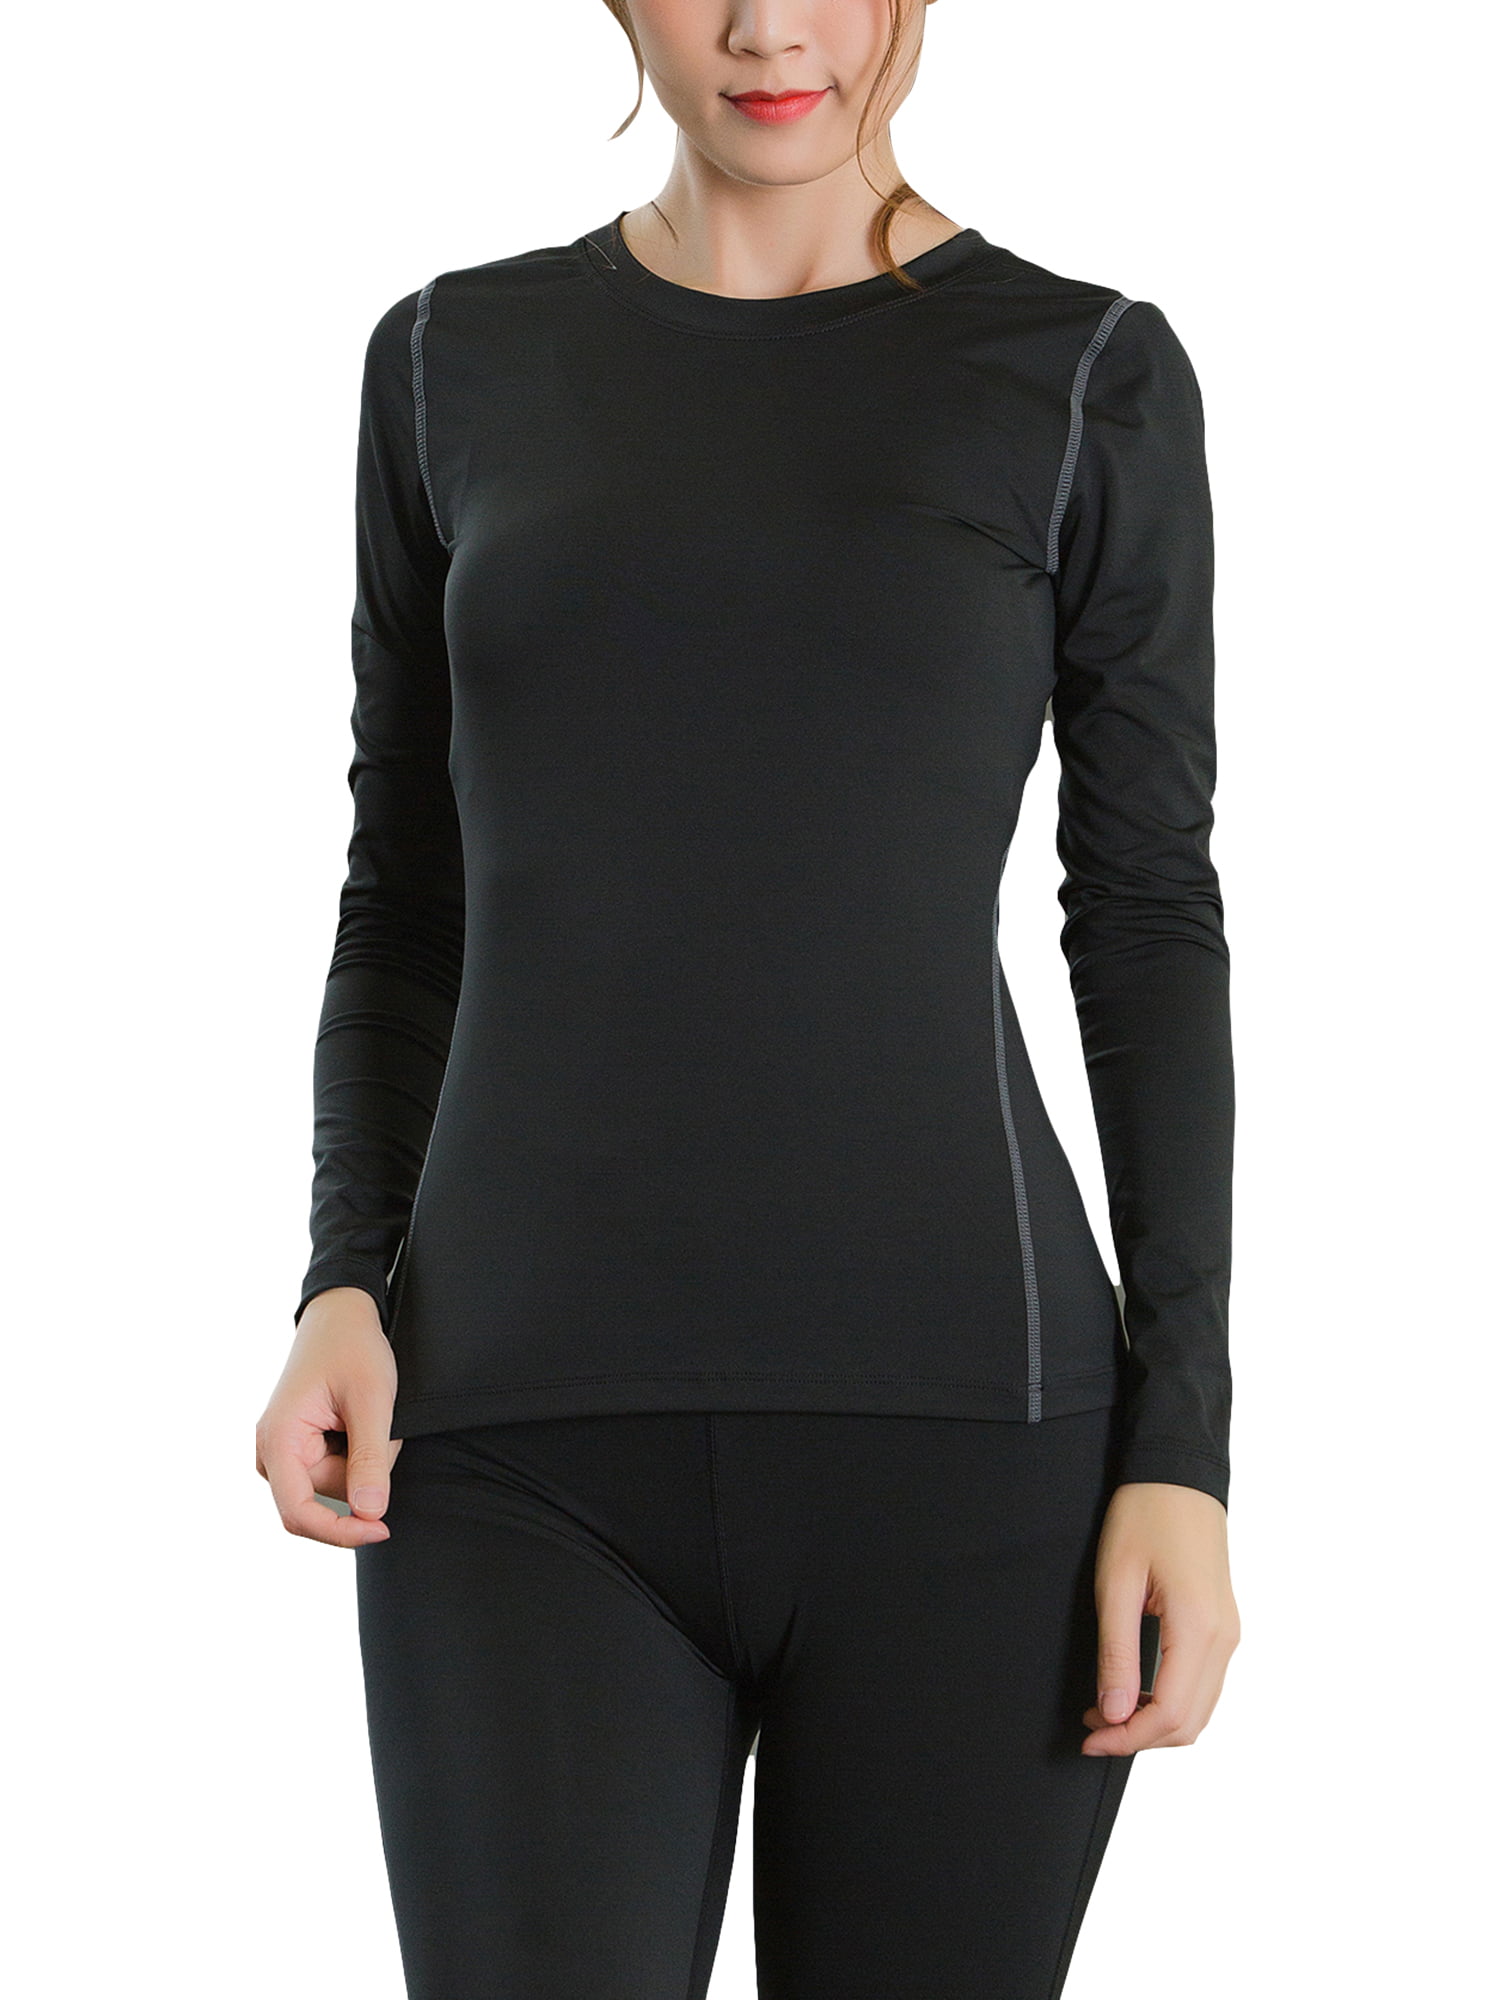 NEWTECHNOLOGYY - Fitness Casual Women Compression Long Sleeve Workout ...